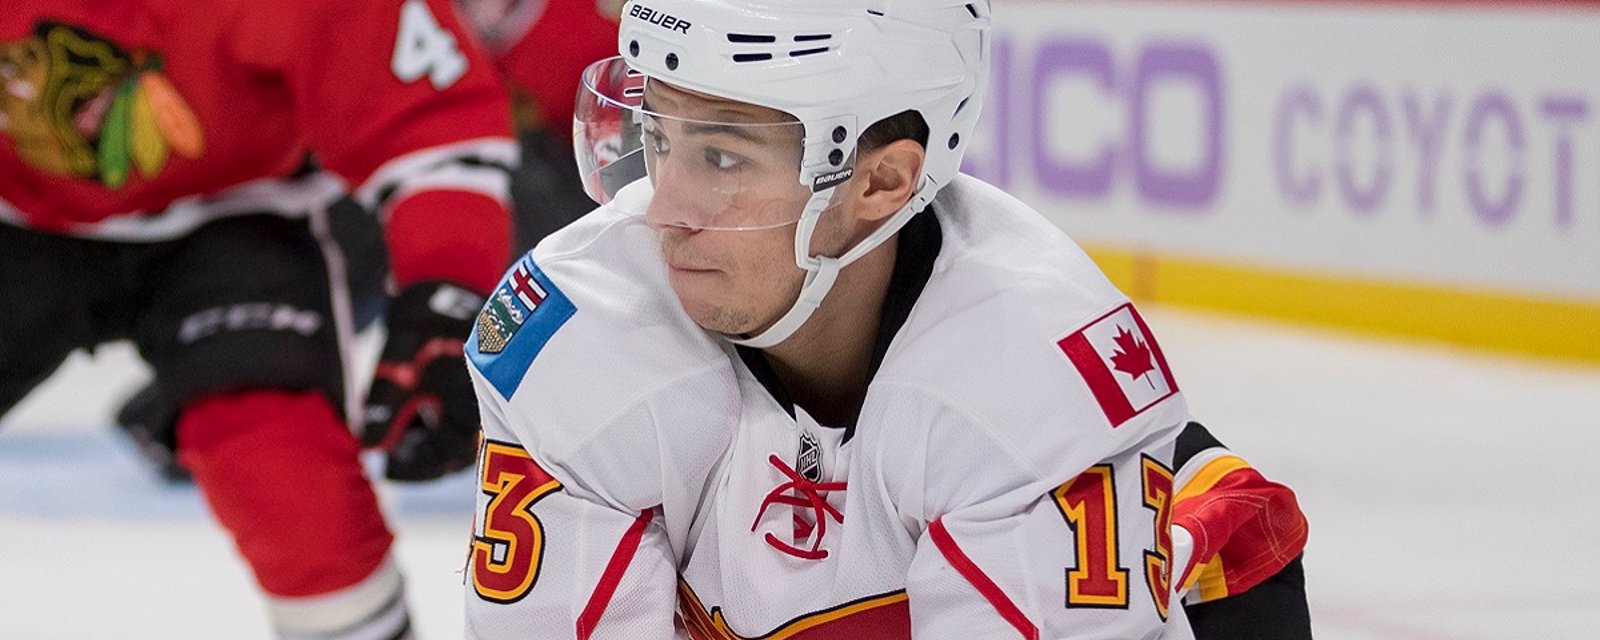 Breaking: Flames GM Treliving has post-surgery update on Johnny Hockey.